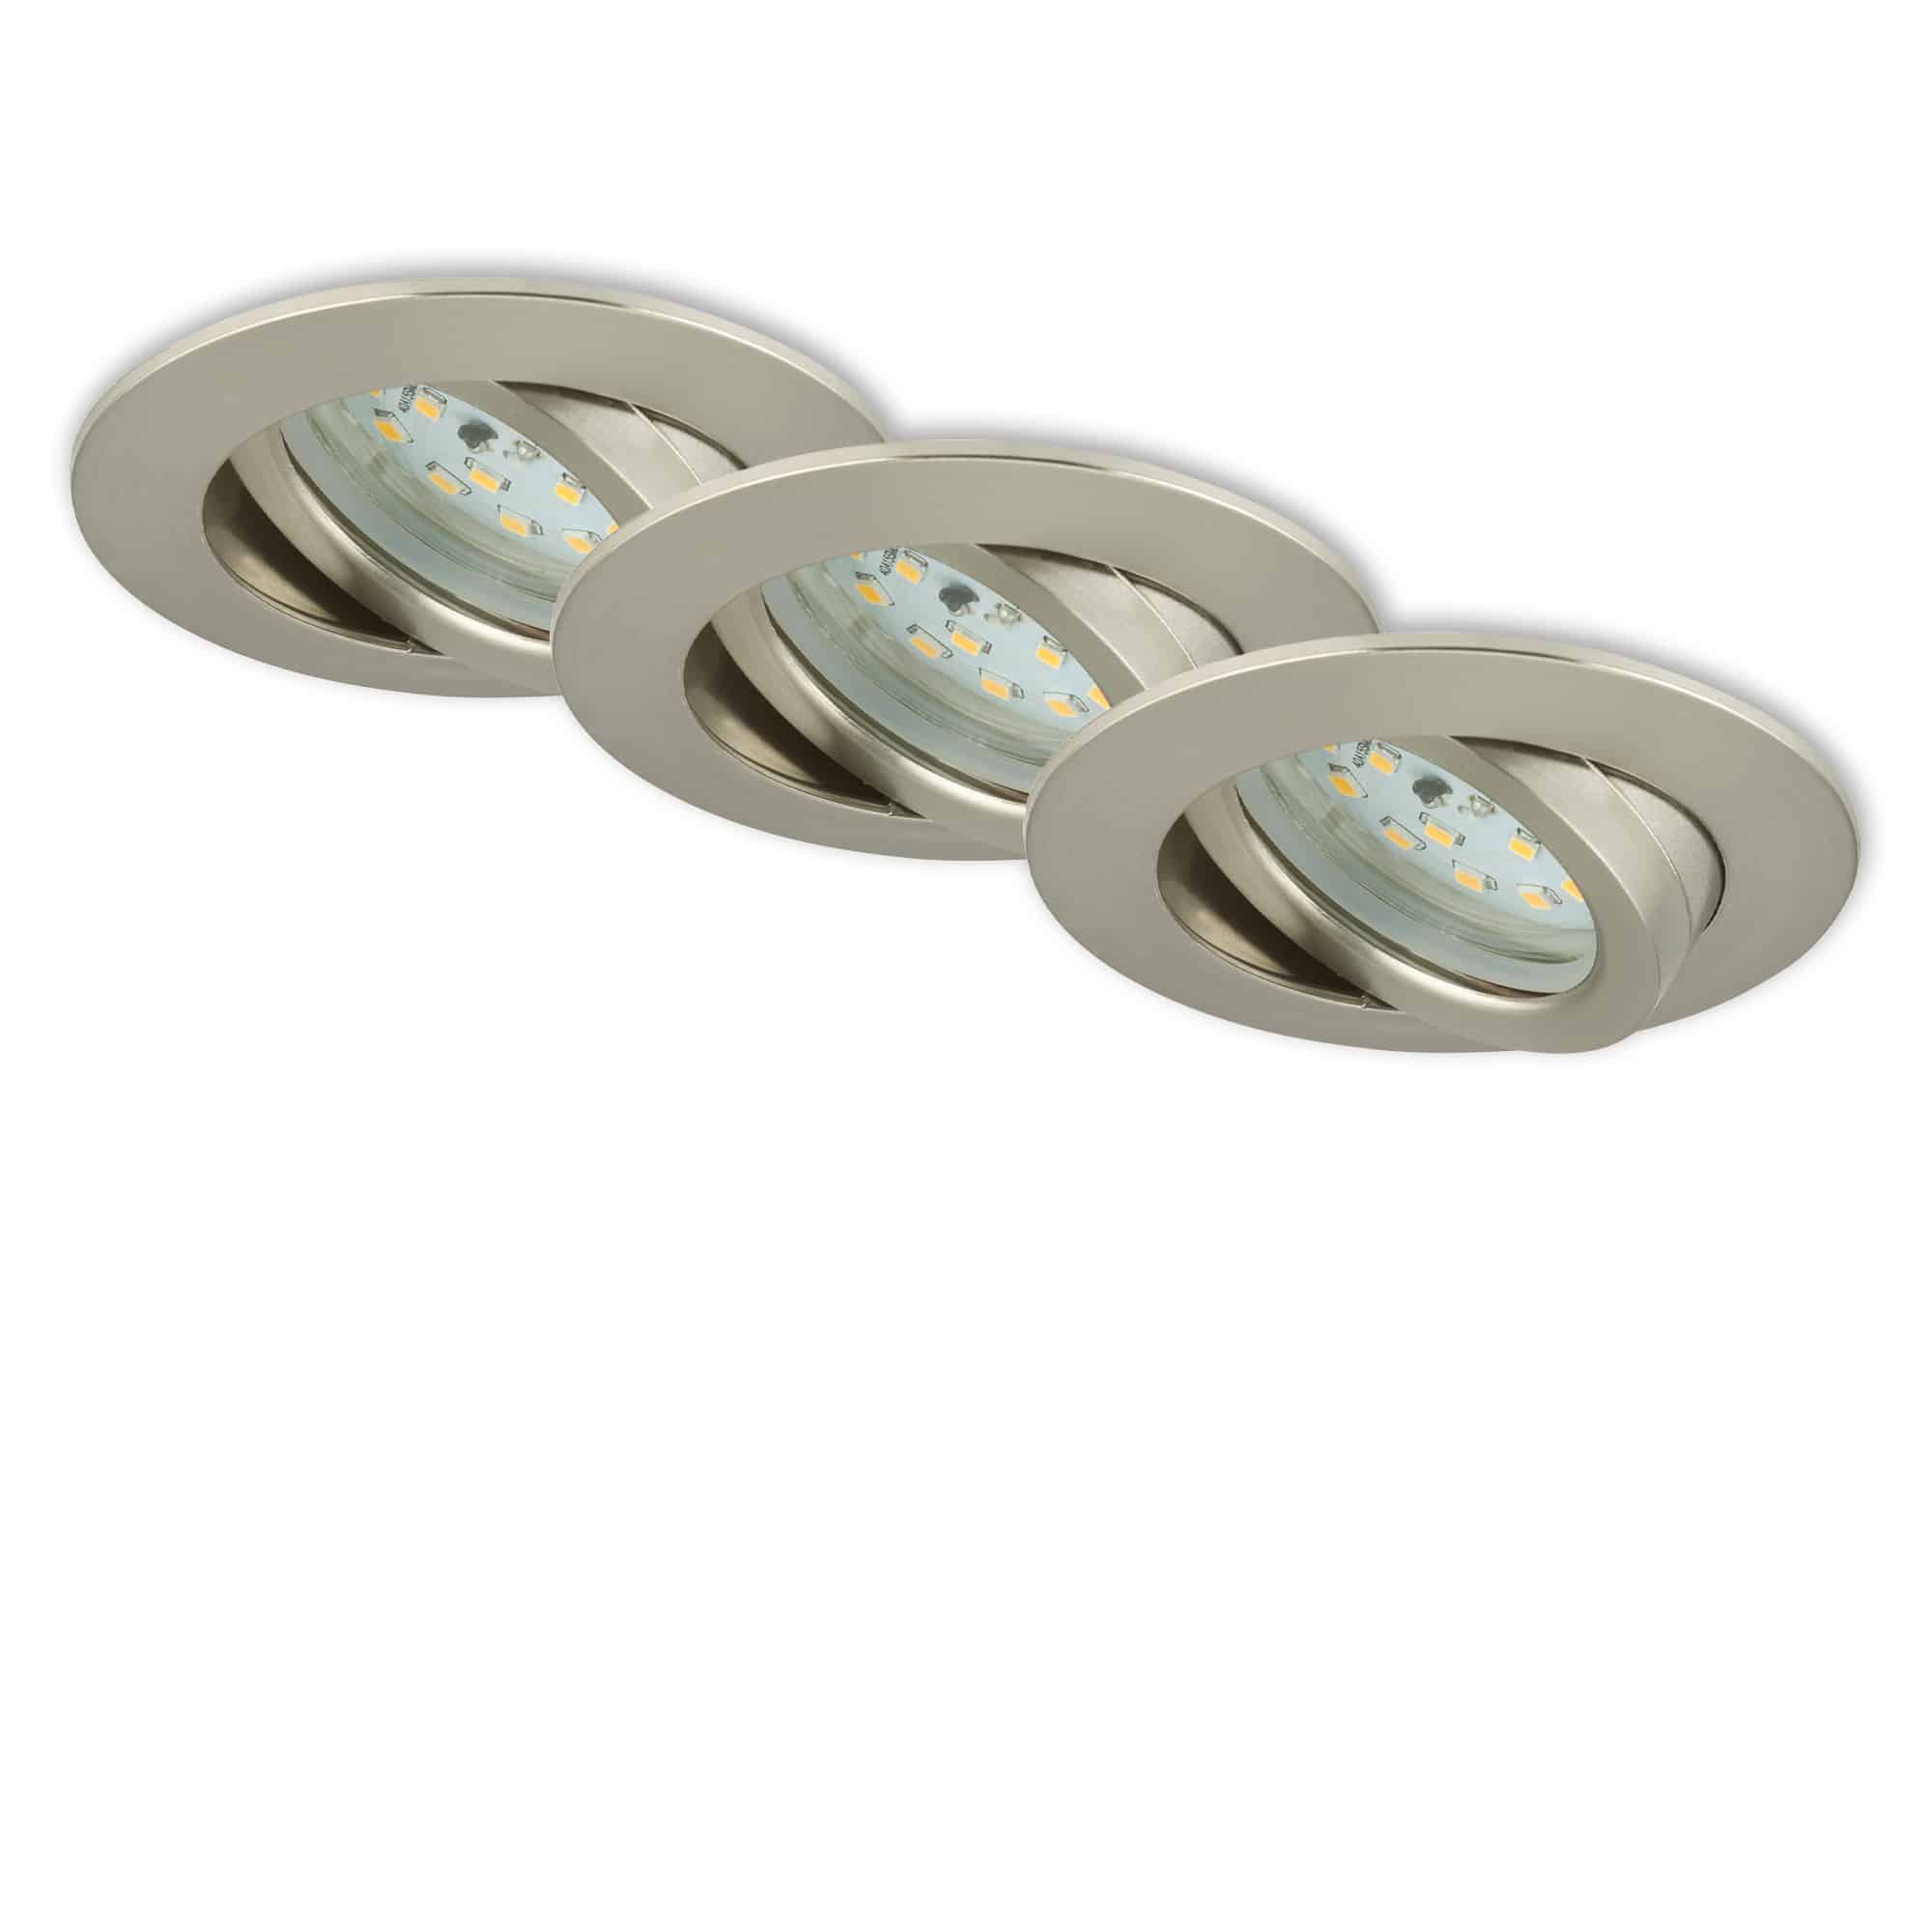 buy Dimmable recessed lights online now